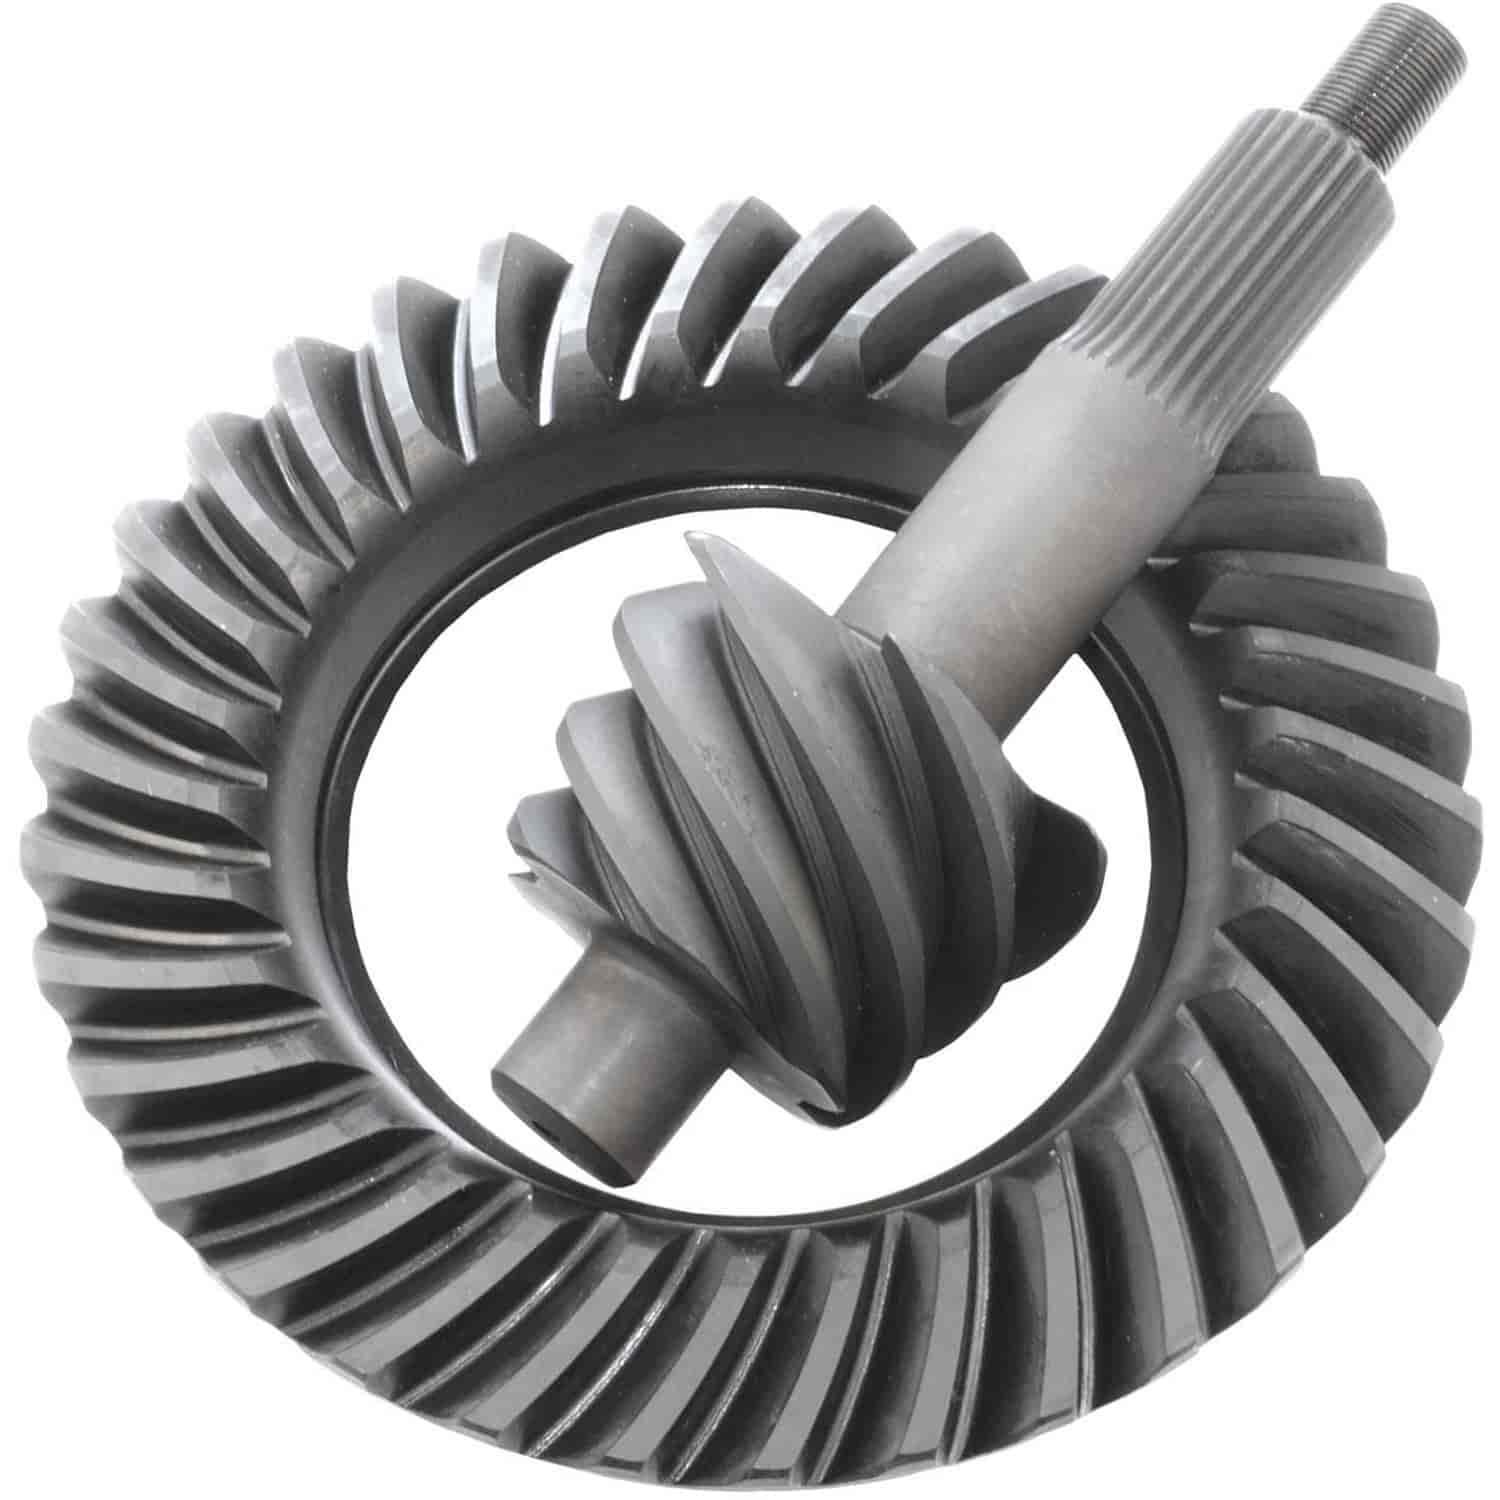 Excel Ring & Pinion Gear Set Ford 9" Ratio: 5.67